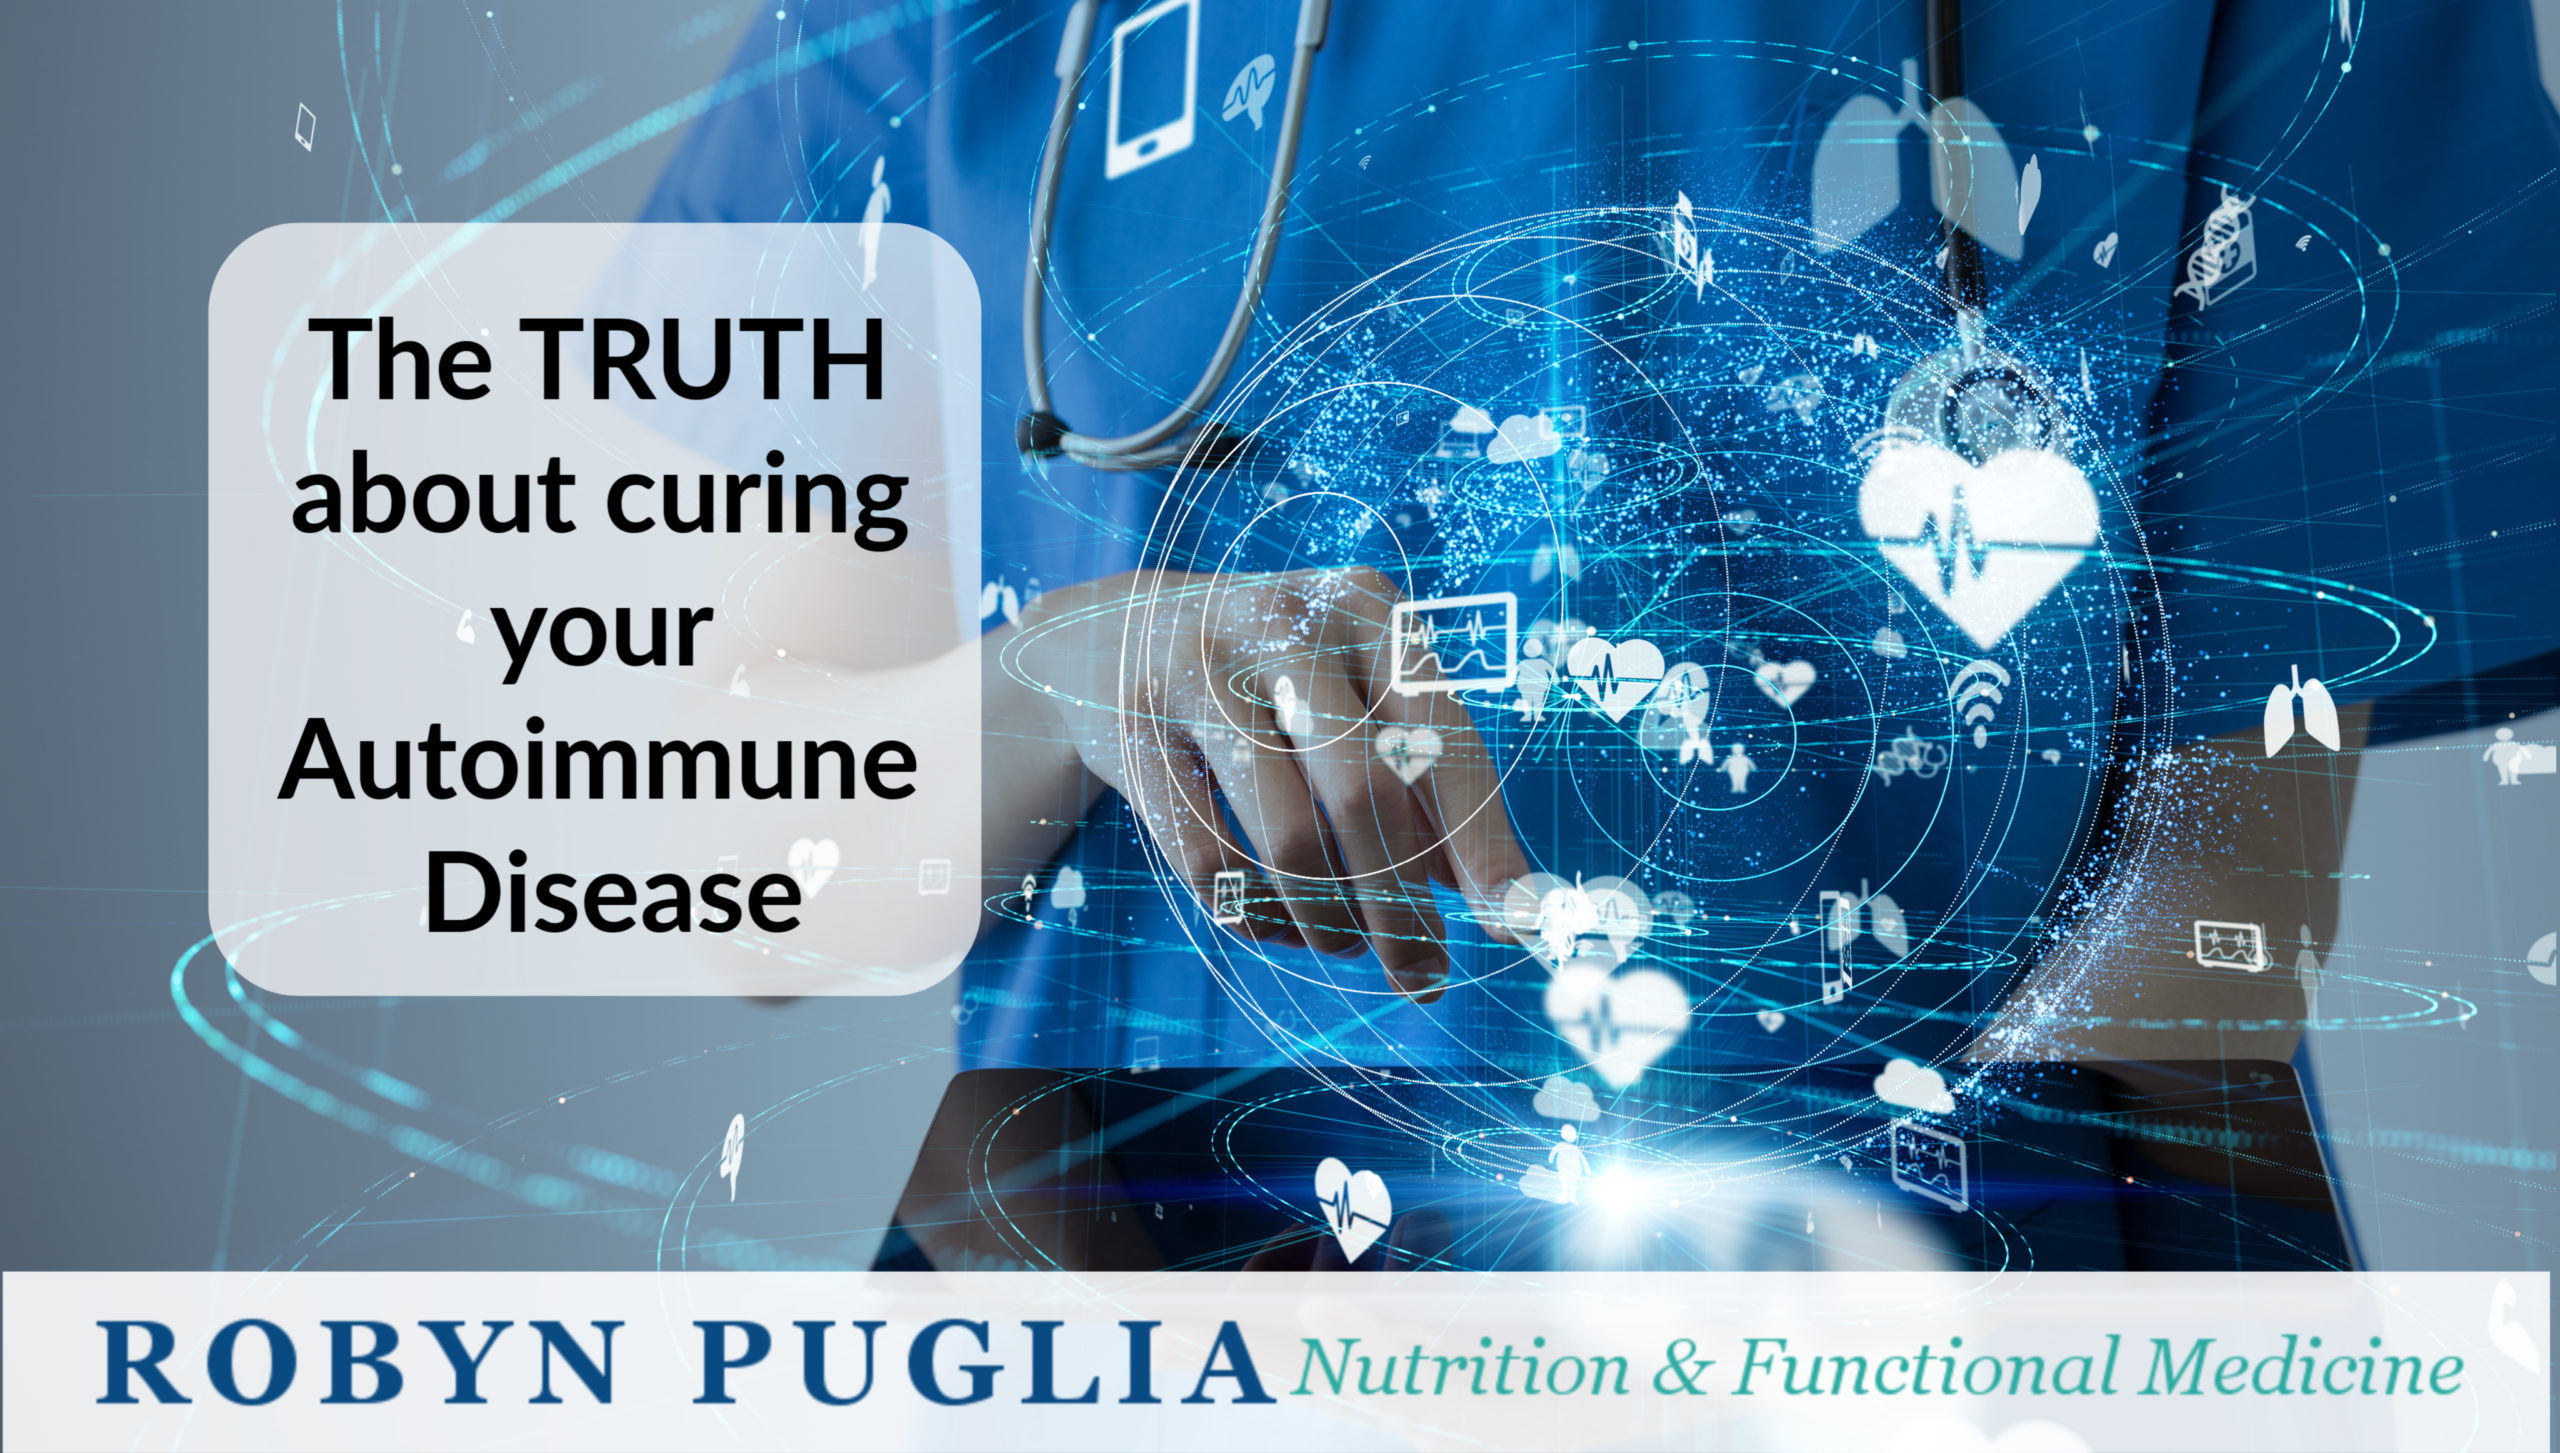 The truth about curing your autoimmune disease